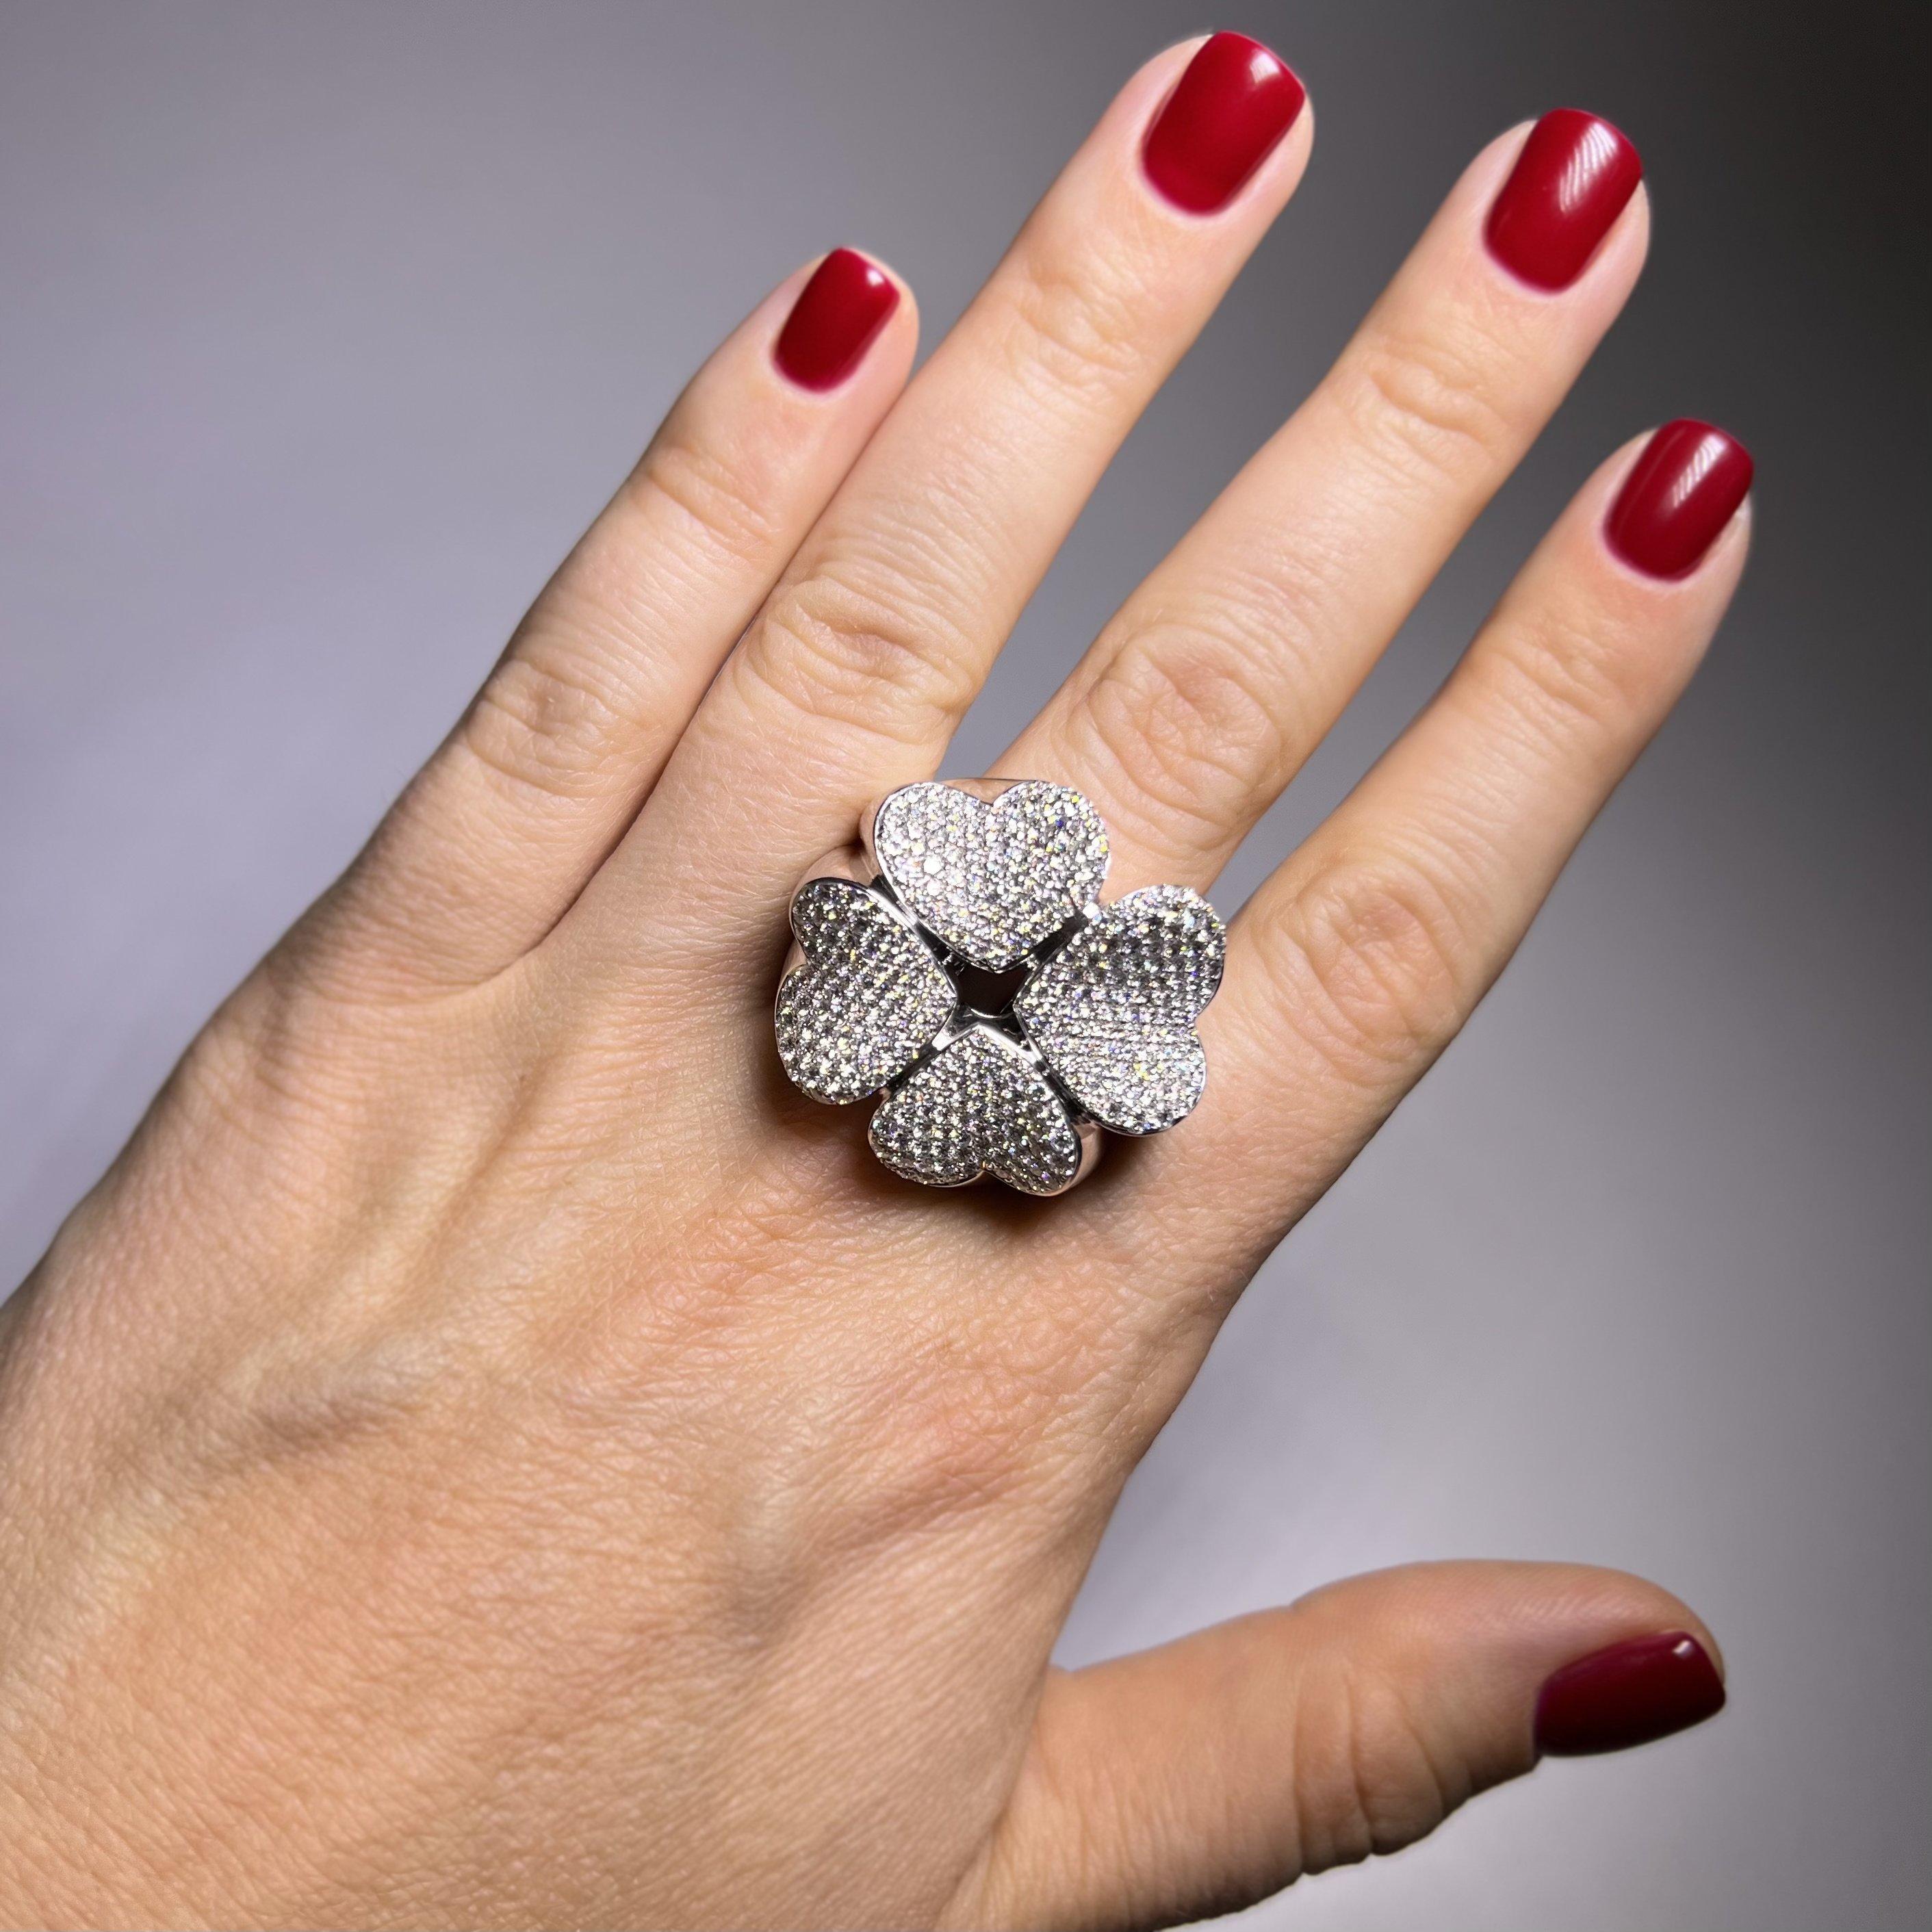 Clover Diamond Ring in 18 Karat White Gold by Pasquale Bruni 5